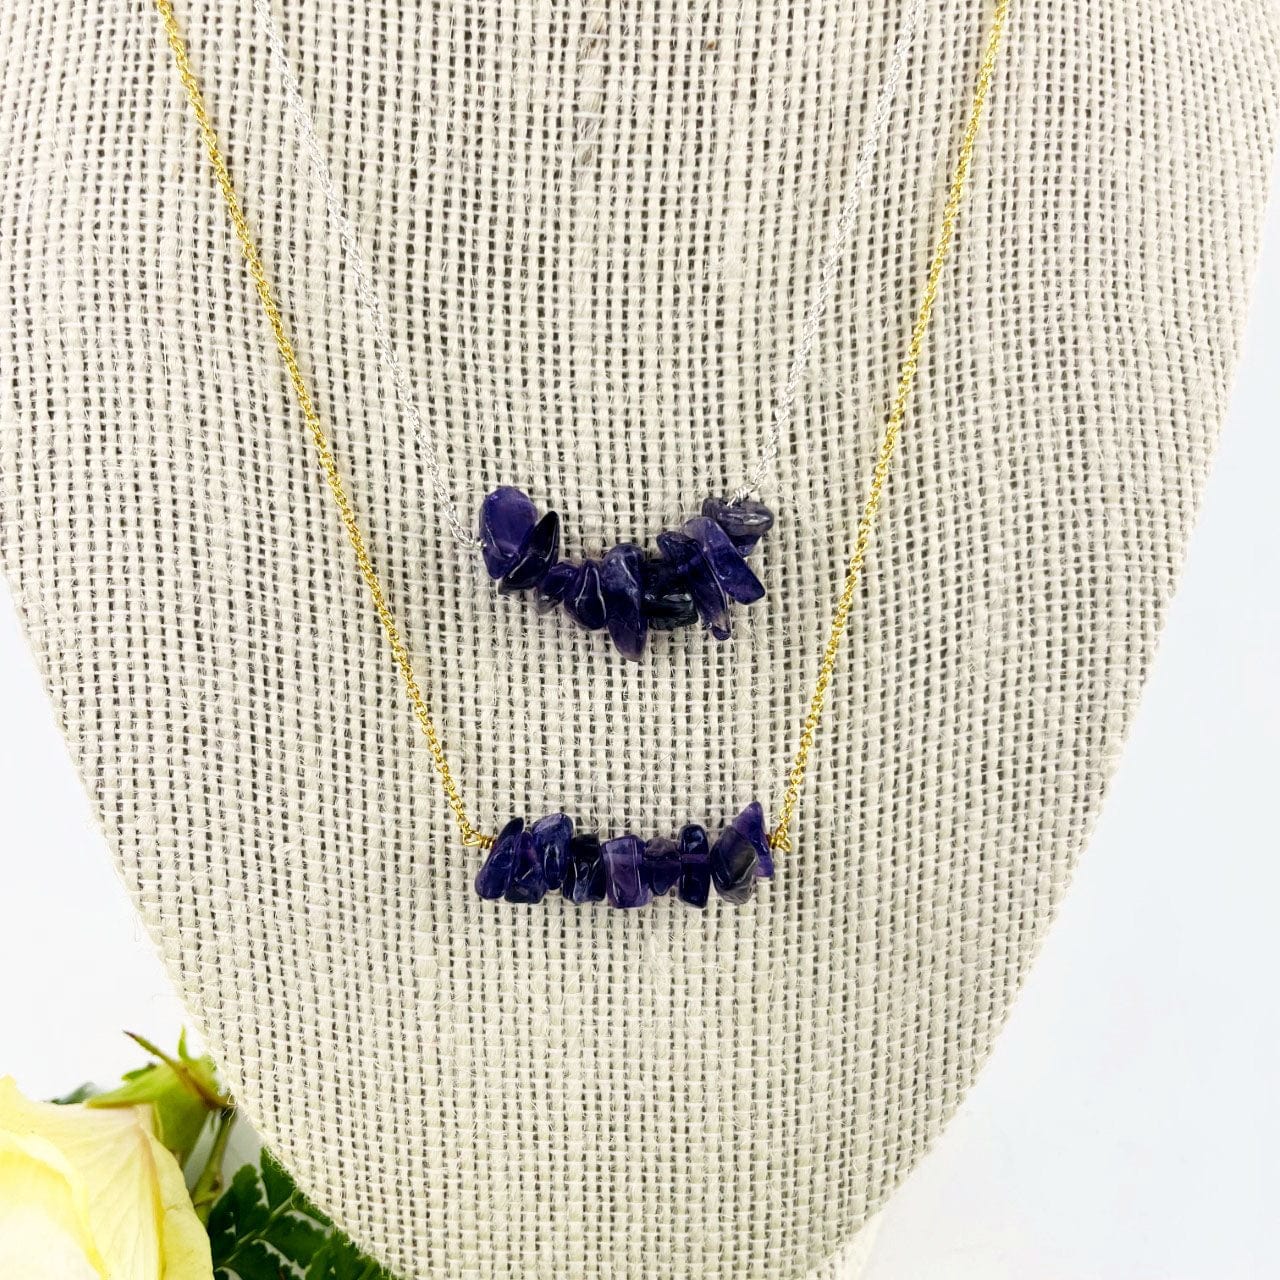 Amethyst Stone Necklace - February Birthstone - Gold over Sterling or Sterling Silver Adjustable Length up close